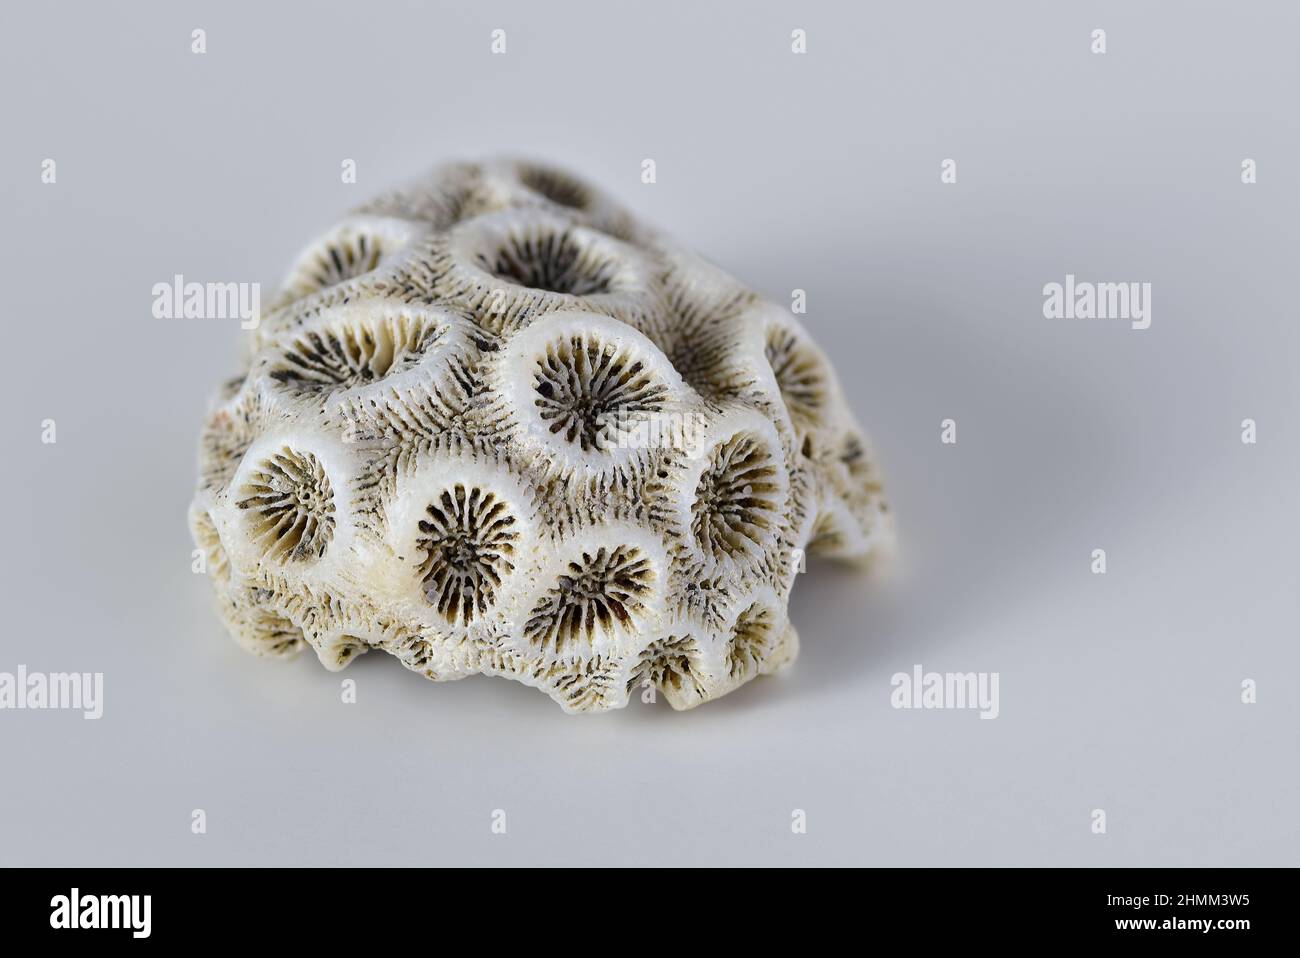 Dead white hard coral or stony coral (Scleractinia) on light grey background, shallow depth of field macro photography Stock Photo